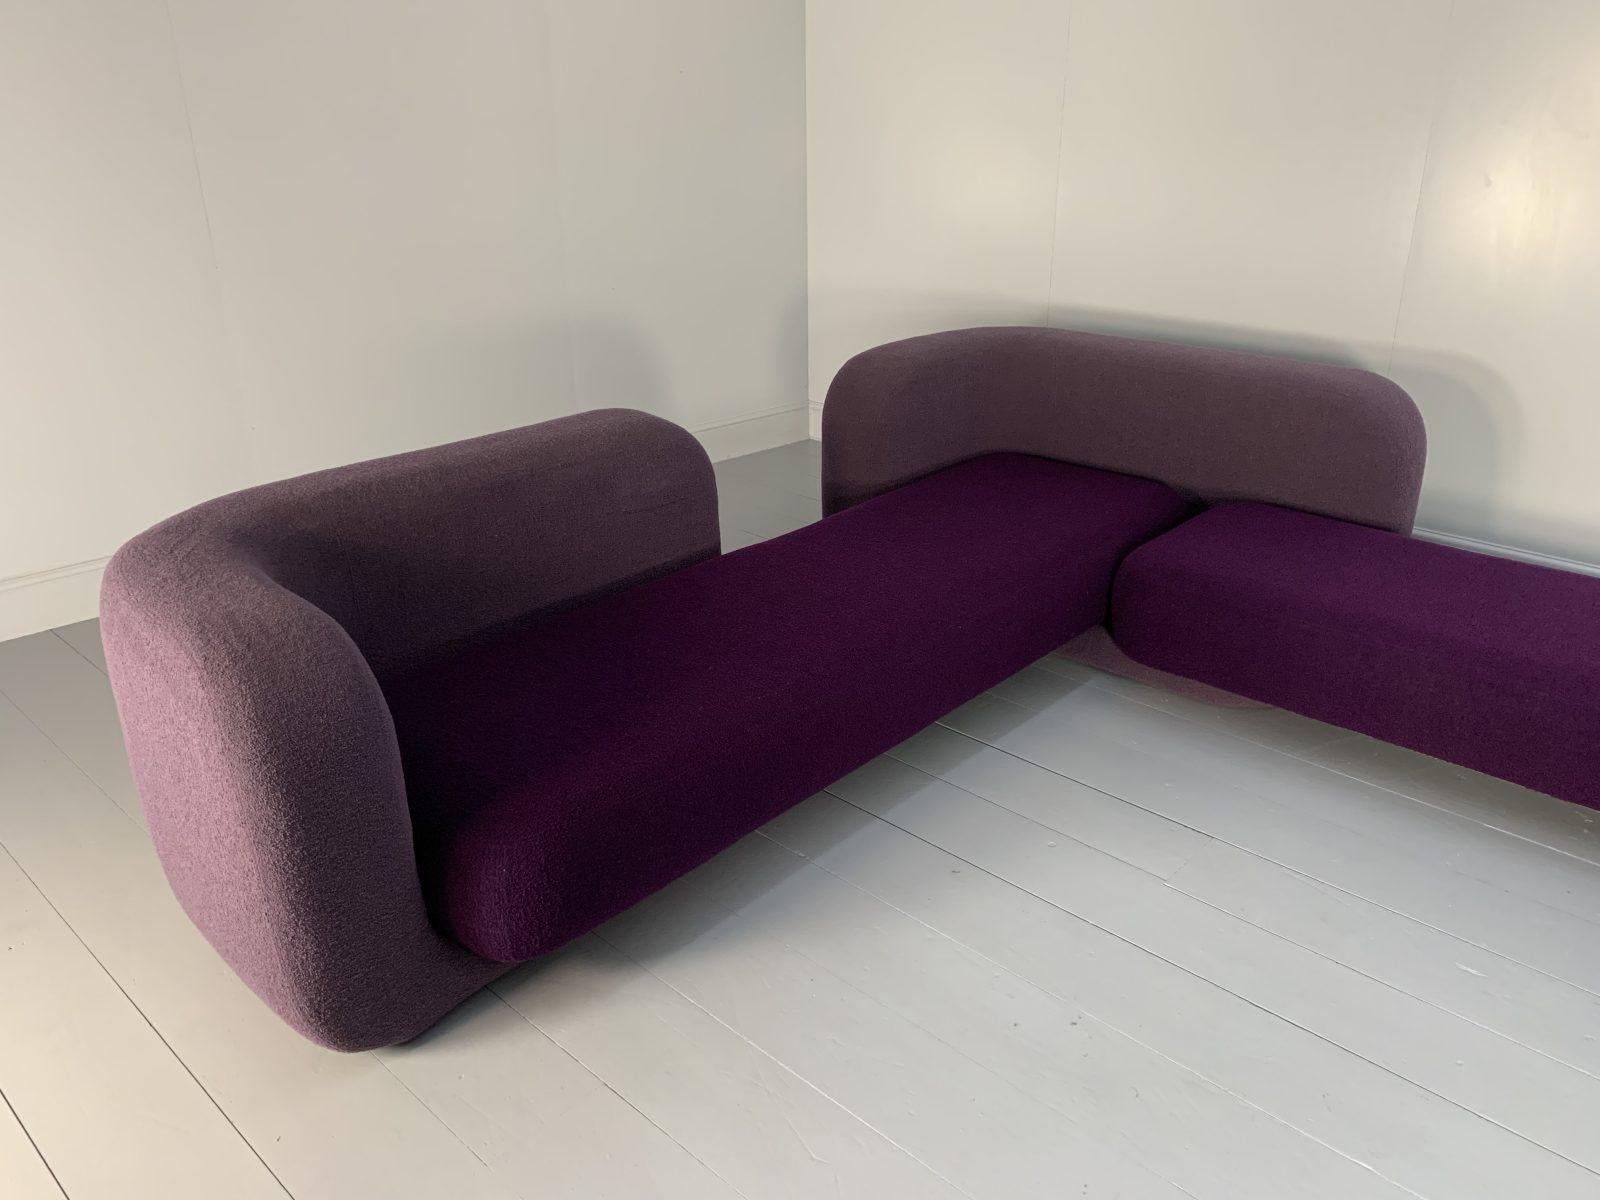 Tom Dixon “Soft” Sofa, 10-Seat Sofa, Made by George Smith, in Bouclé Wool 2